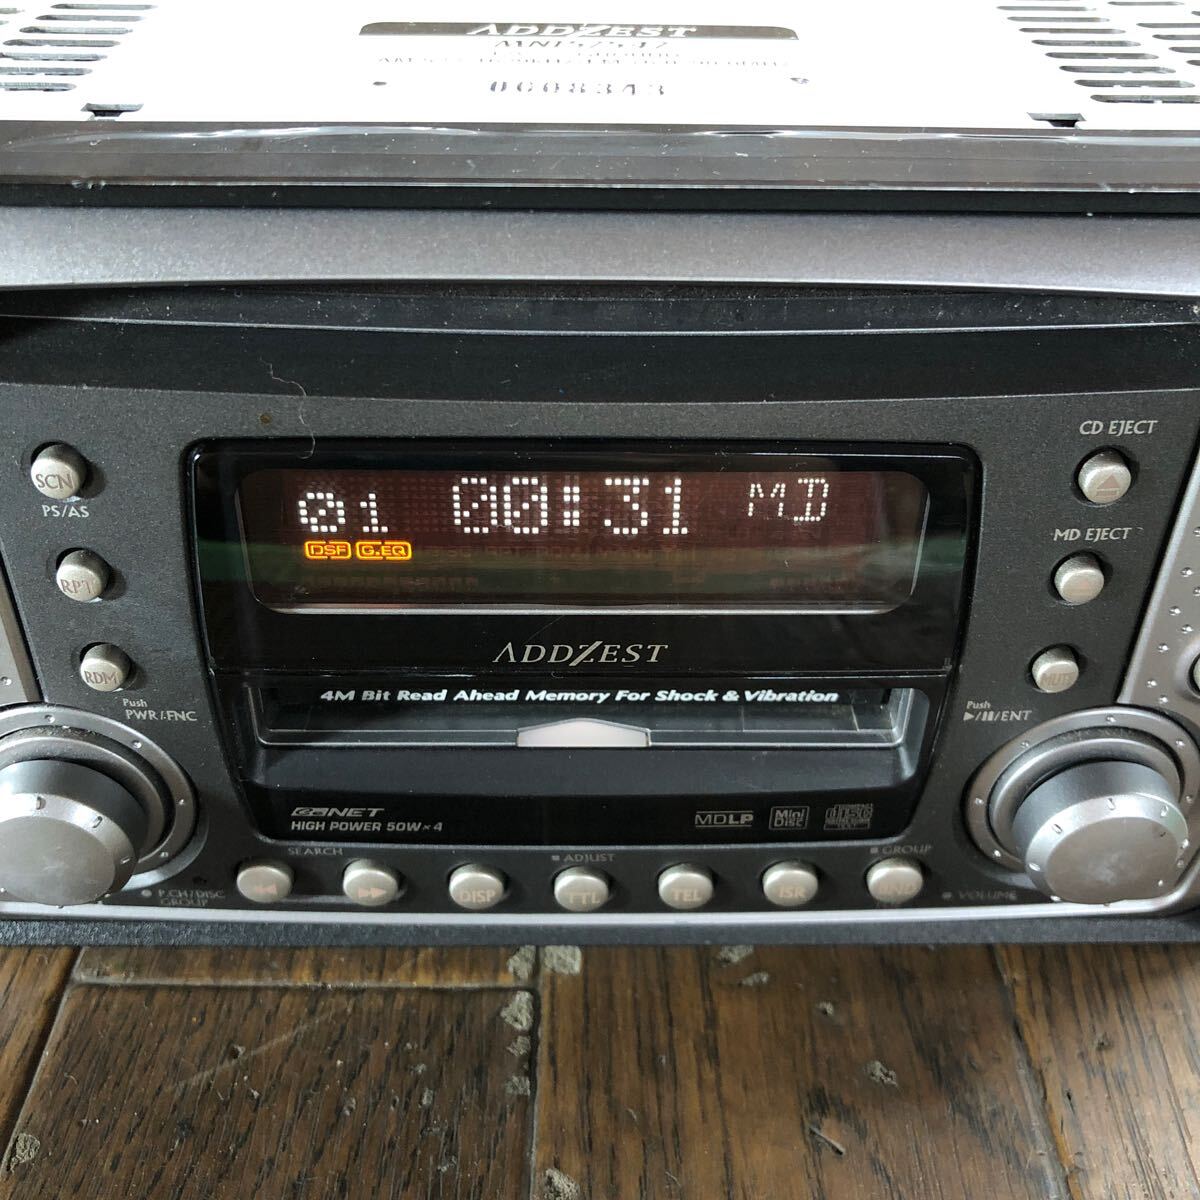 AV4-188 super-discount car stereo ADDZEST MN157547 0008343 CD MD FM/AM player receiver simple operation verification ending used present condition goods 